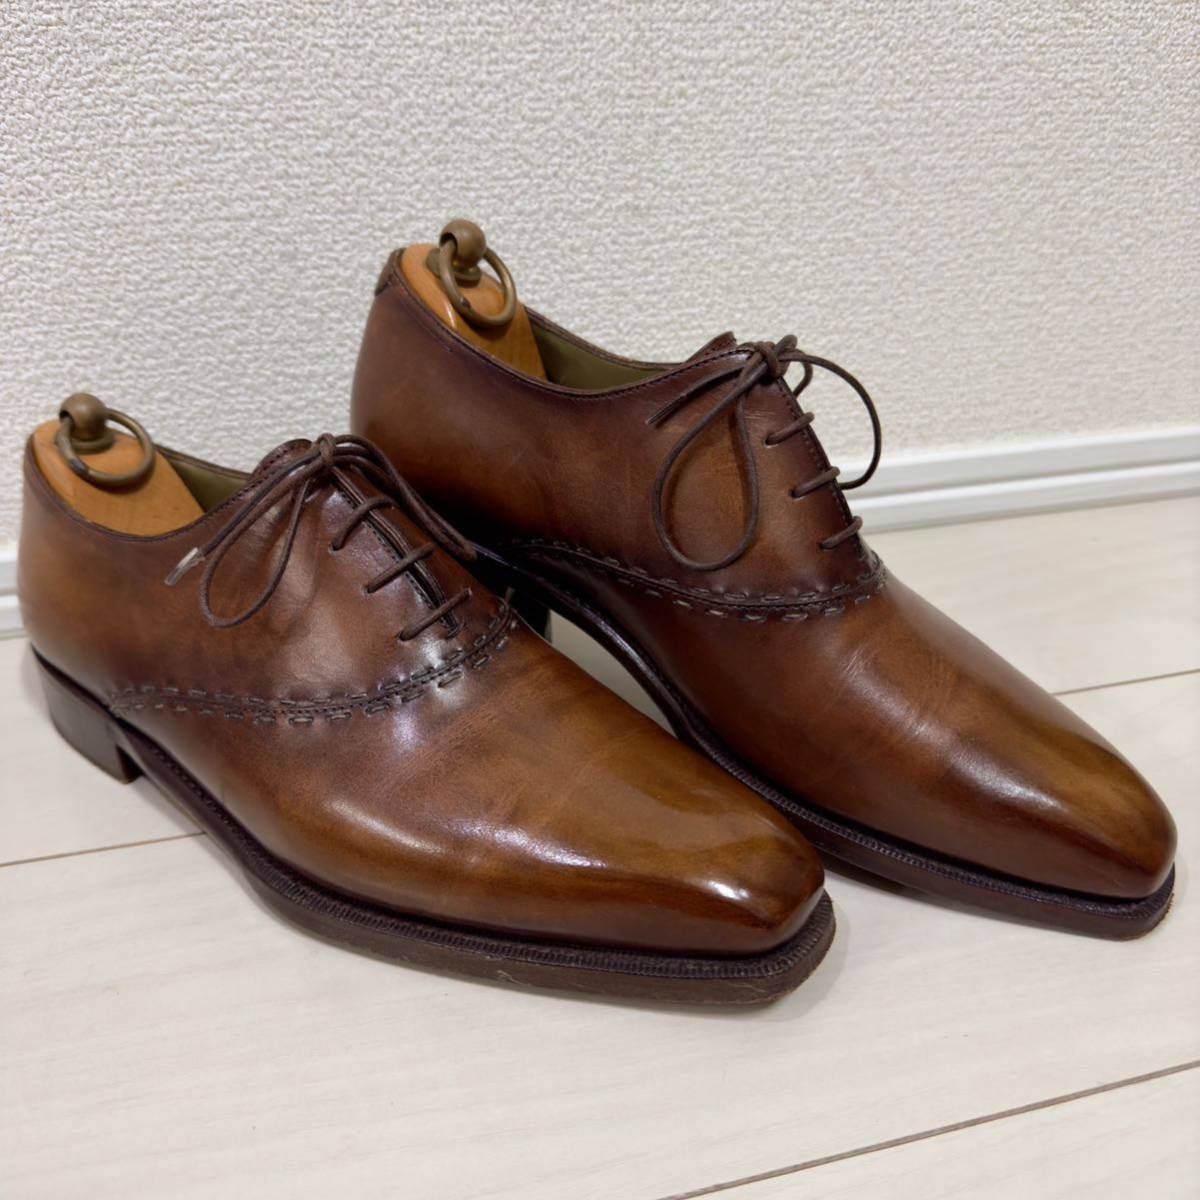  rare regular price 33.7 ten thousand jpy Berluti Goodyear made law pa tea n leather stitch business shoes 7.5 leather shoes ma dam oruga period Brown genuine article tea 